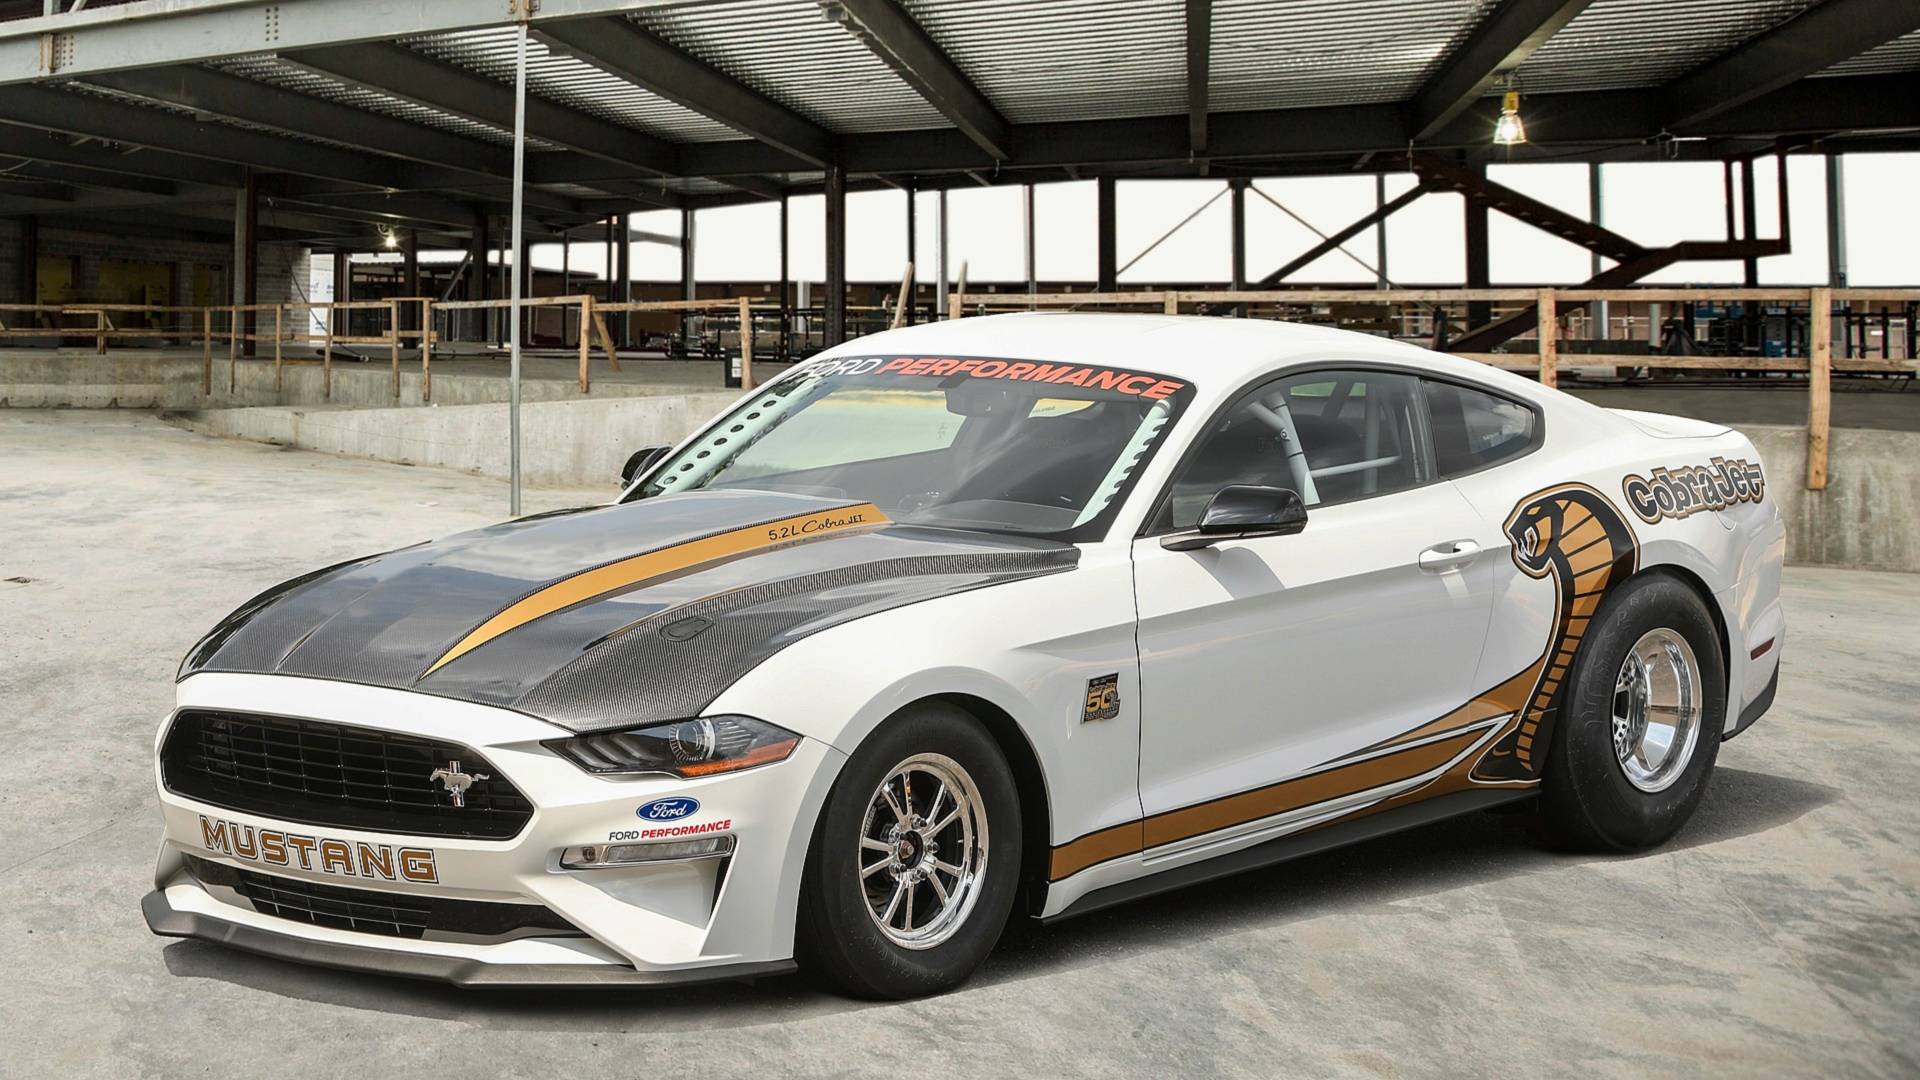 Ford Mustang 50th Anniversary Logo - Ford Mustang Cobra Jet Is An 8-Second Quarter-Mile Demon Killer